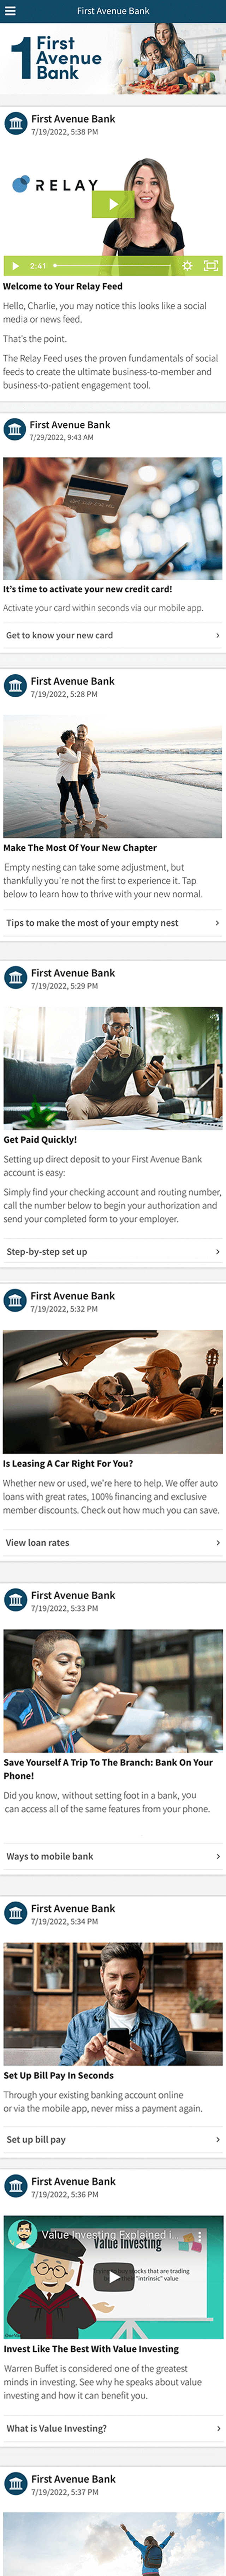 Sample financial services customer feed